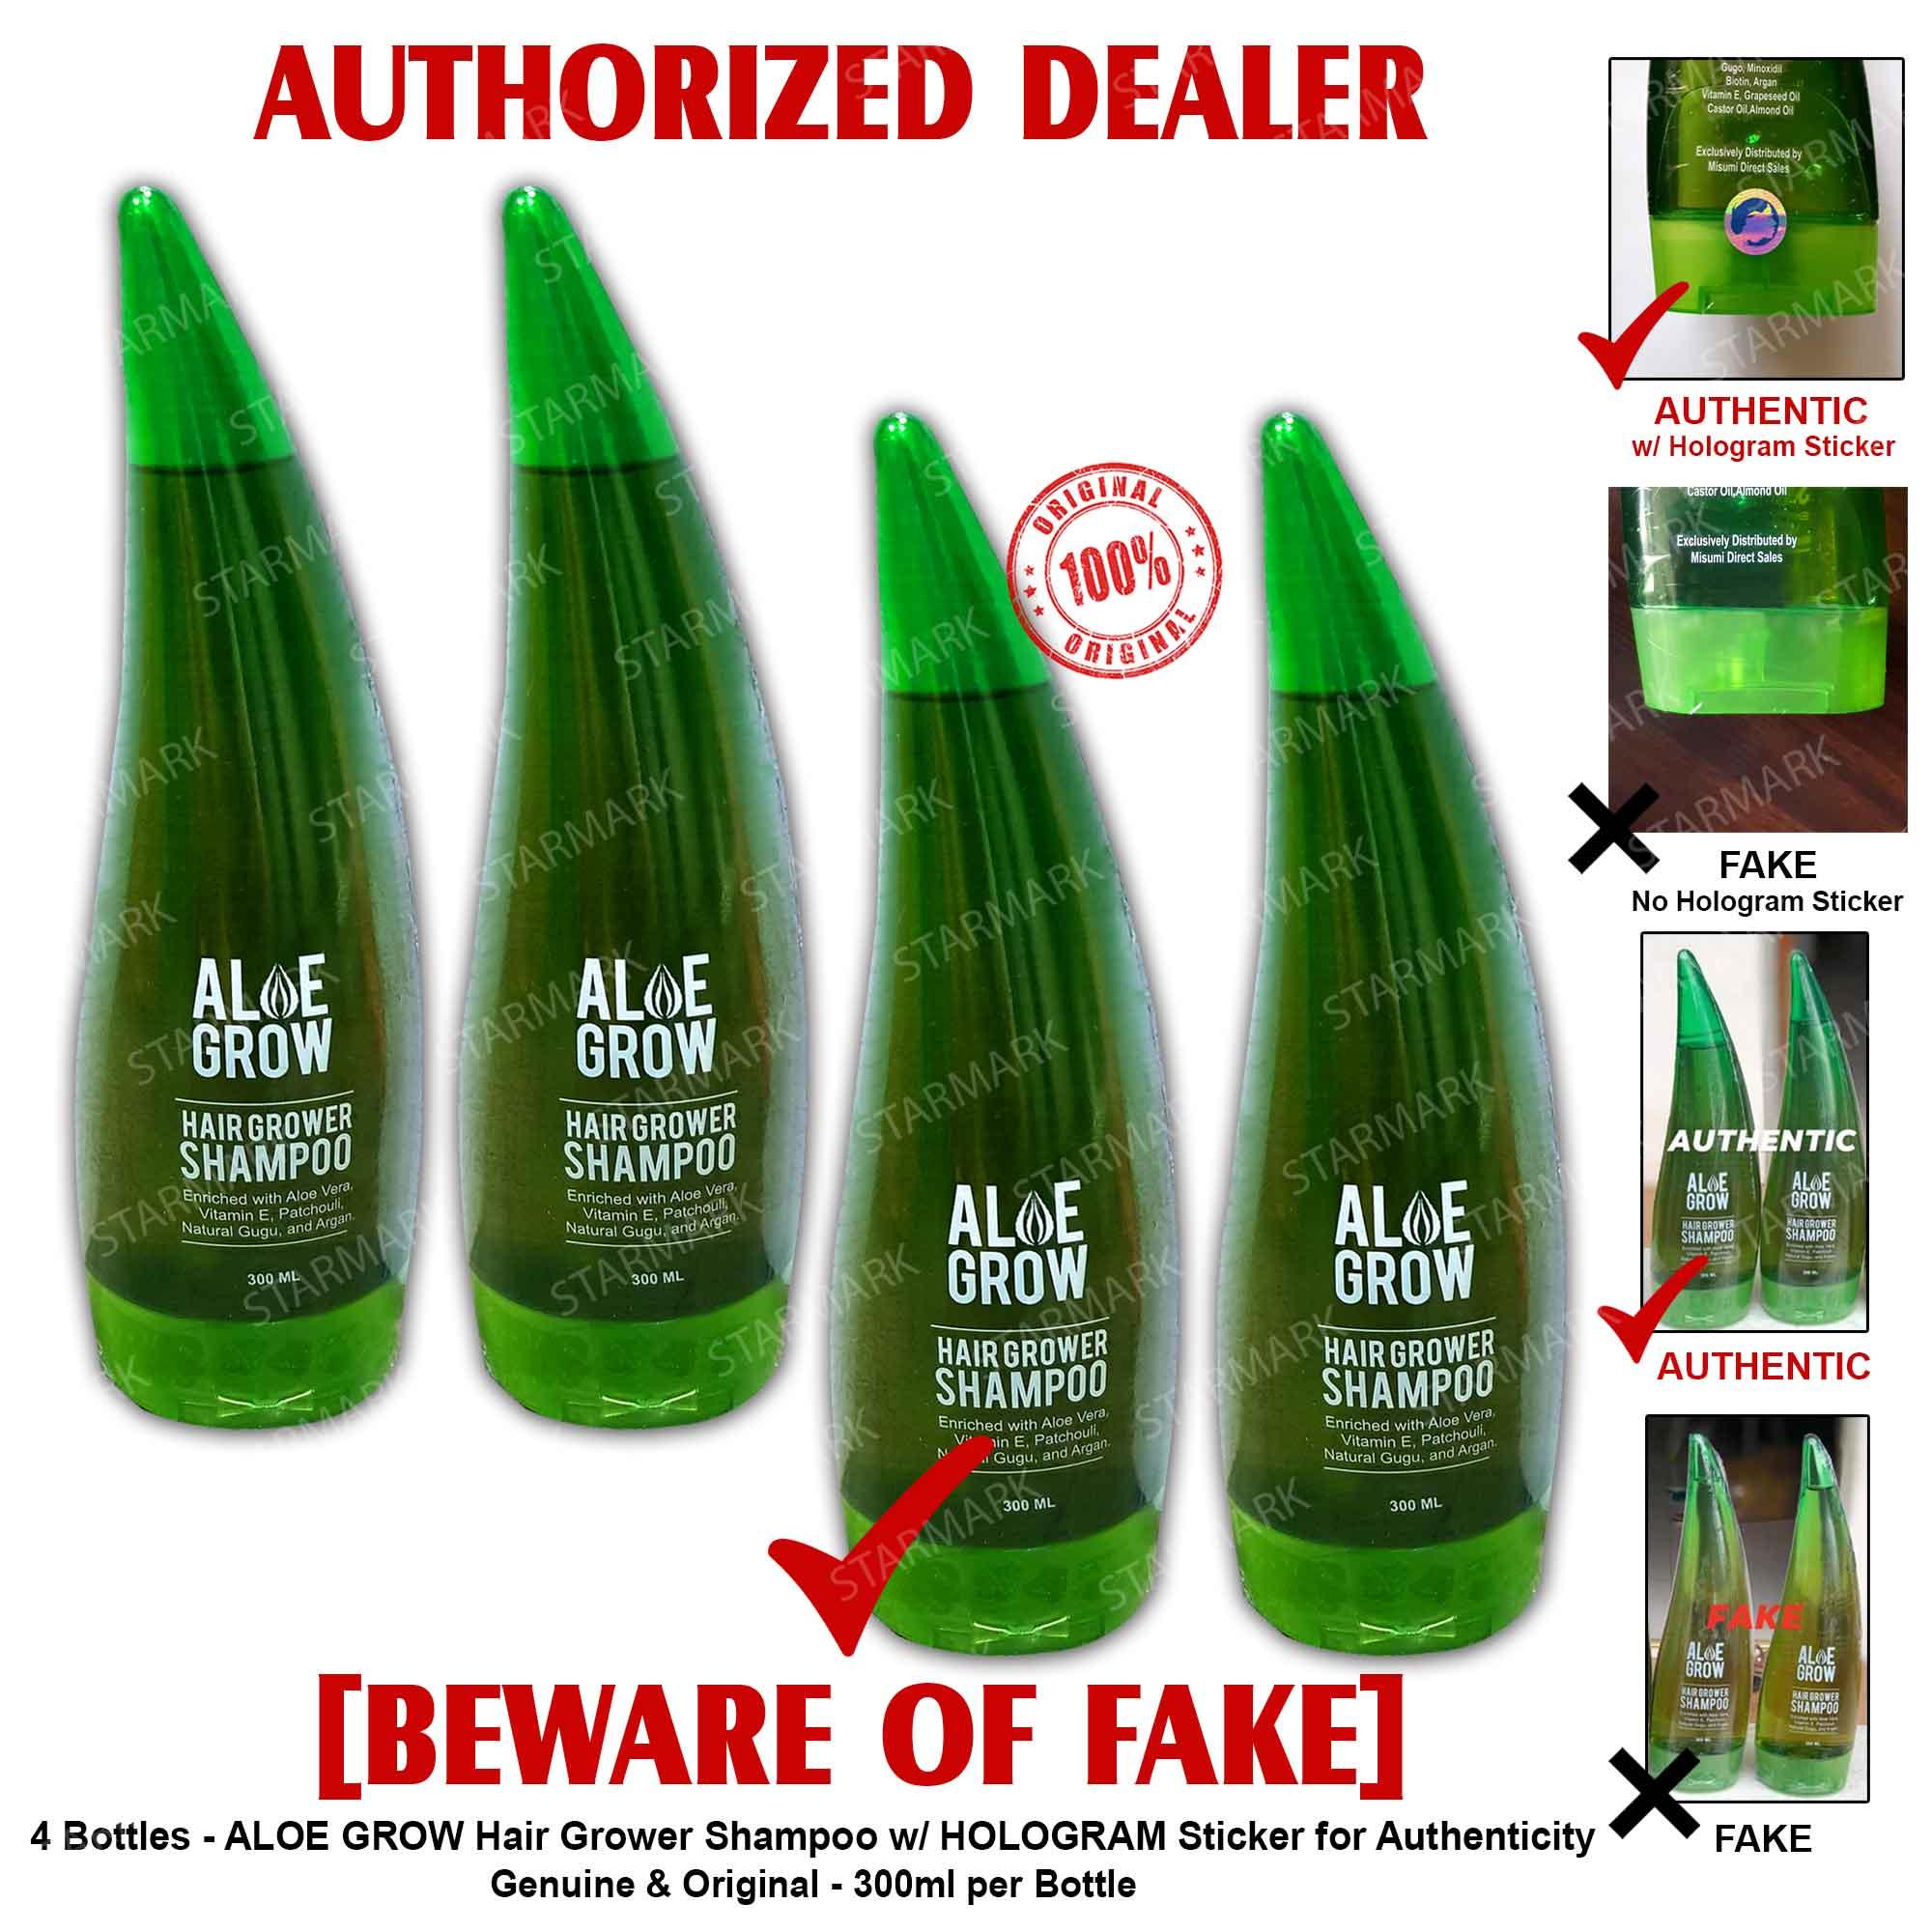 Aloe Grow Hair Grower Shampoo 300ml Per Bottle Authentic Set Of 4 Bottles Review And Price